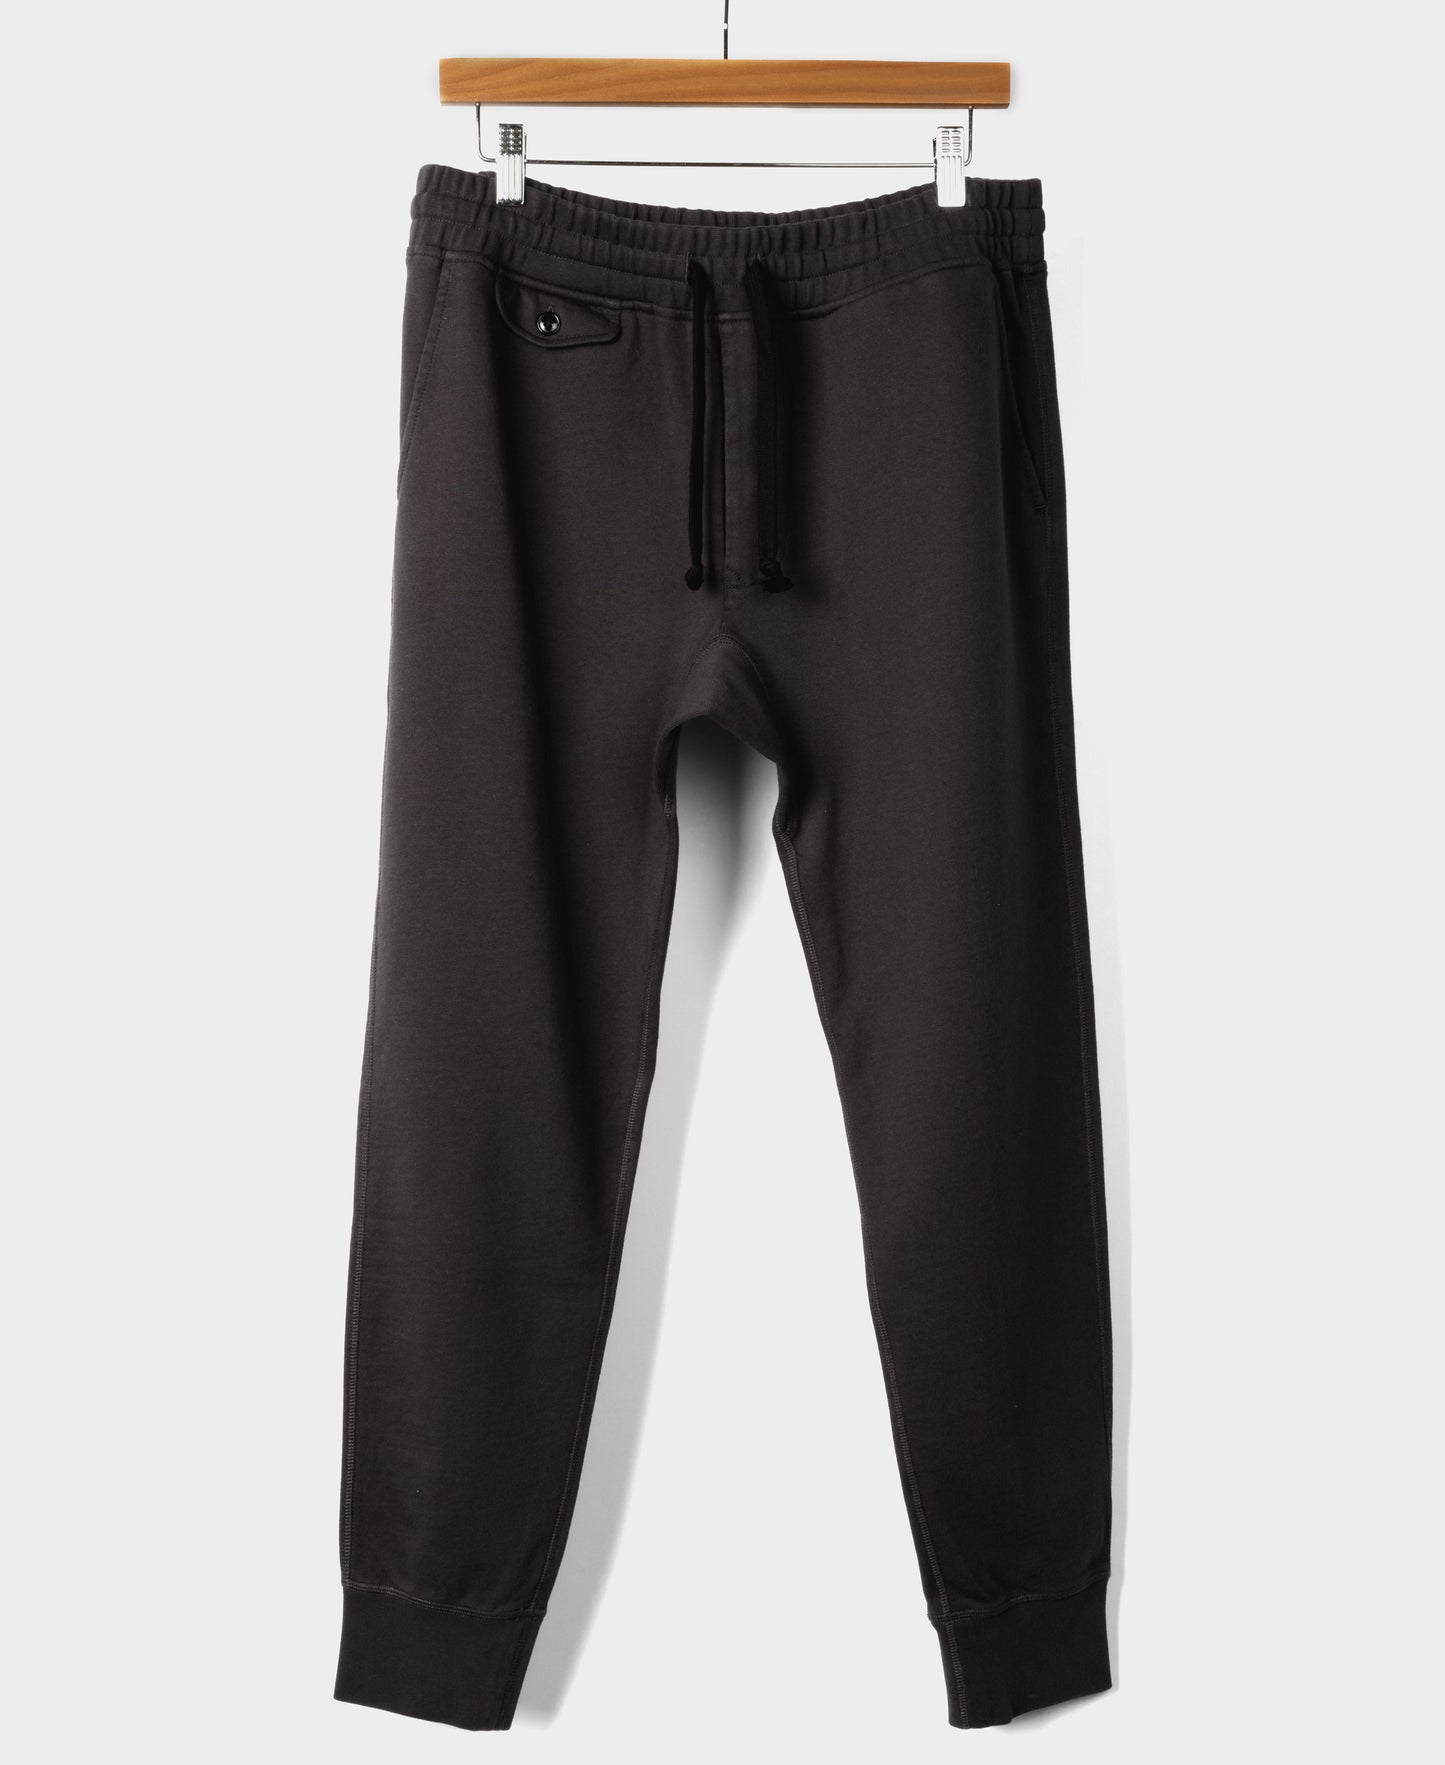 Fields French Terry Sweatpants in Washed Black